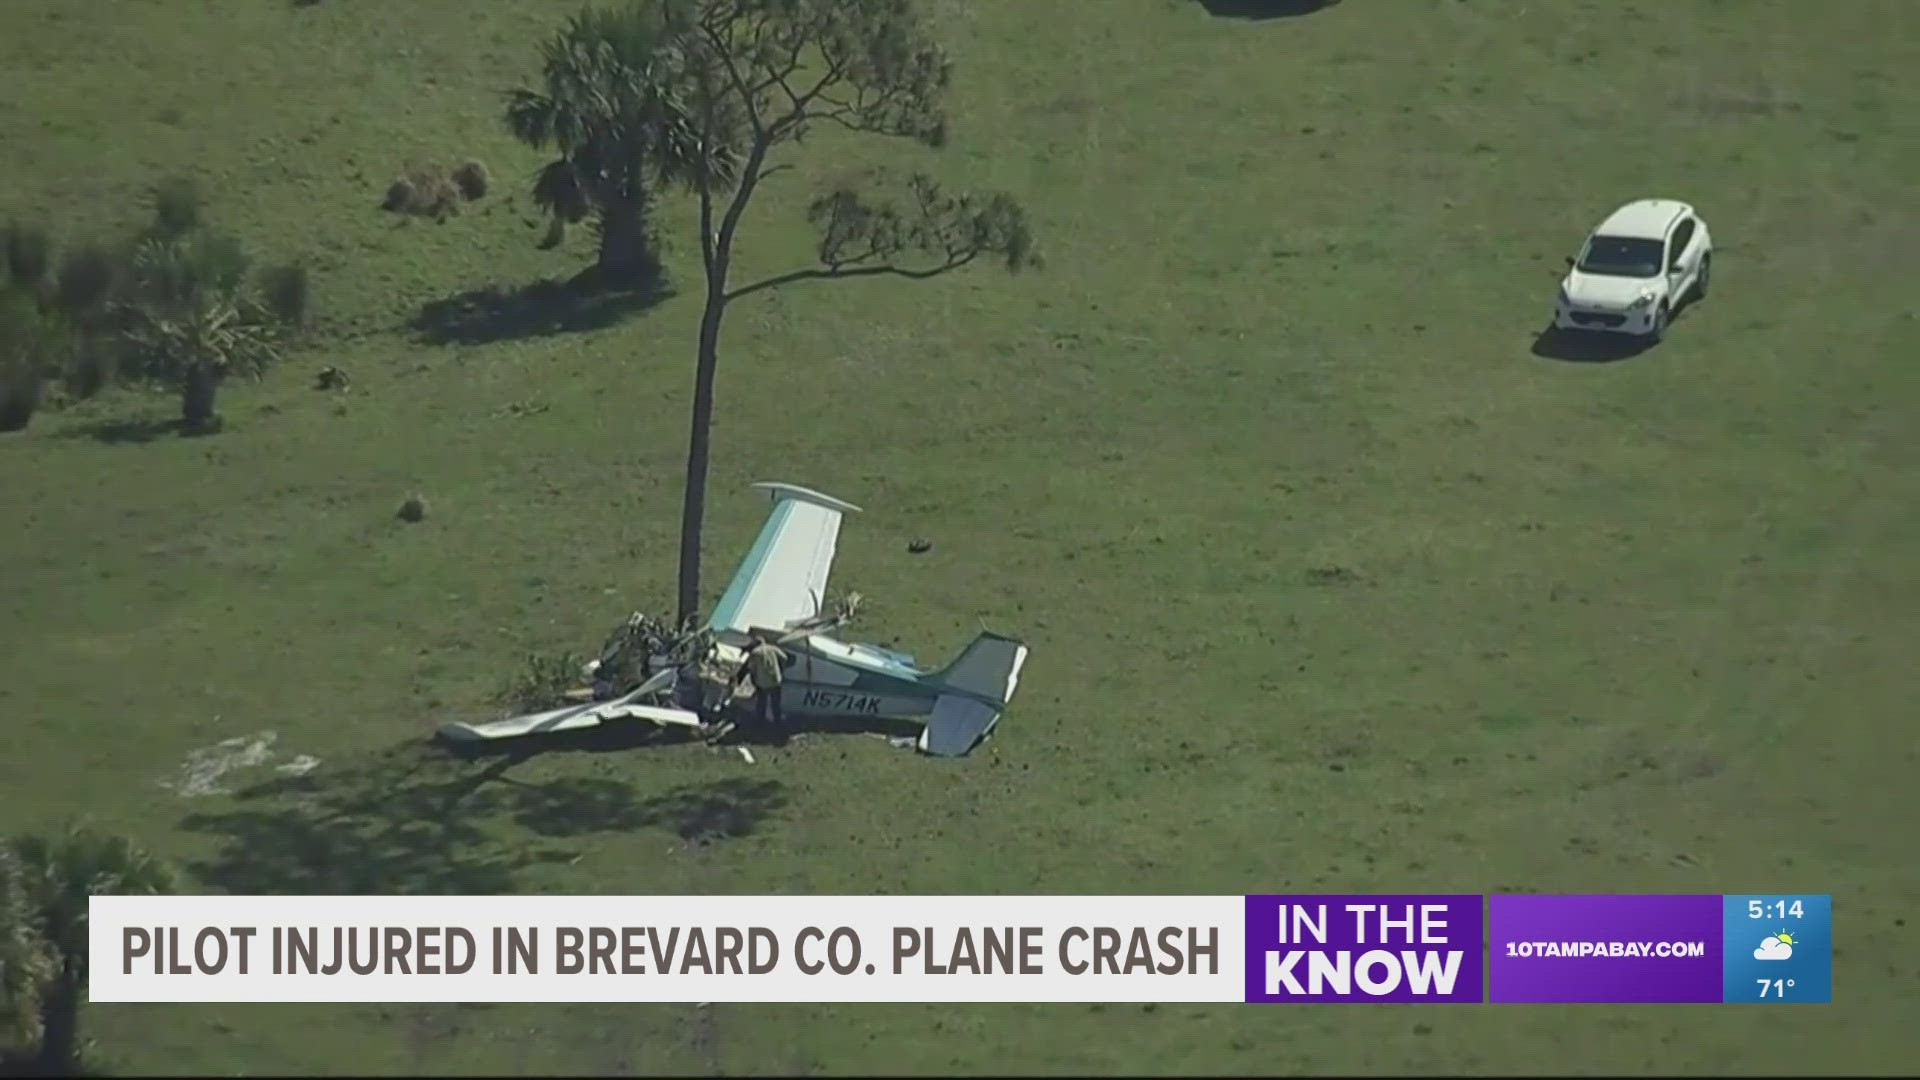 Only one person was reportedly on board during the crash.